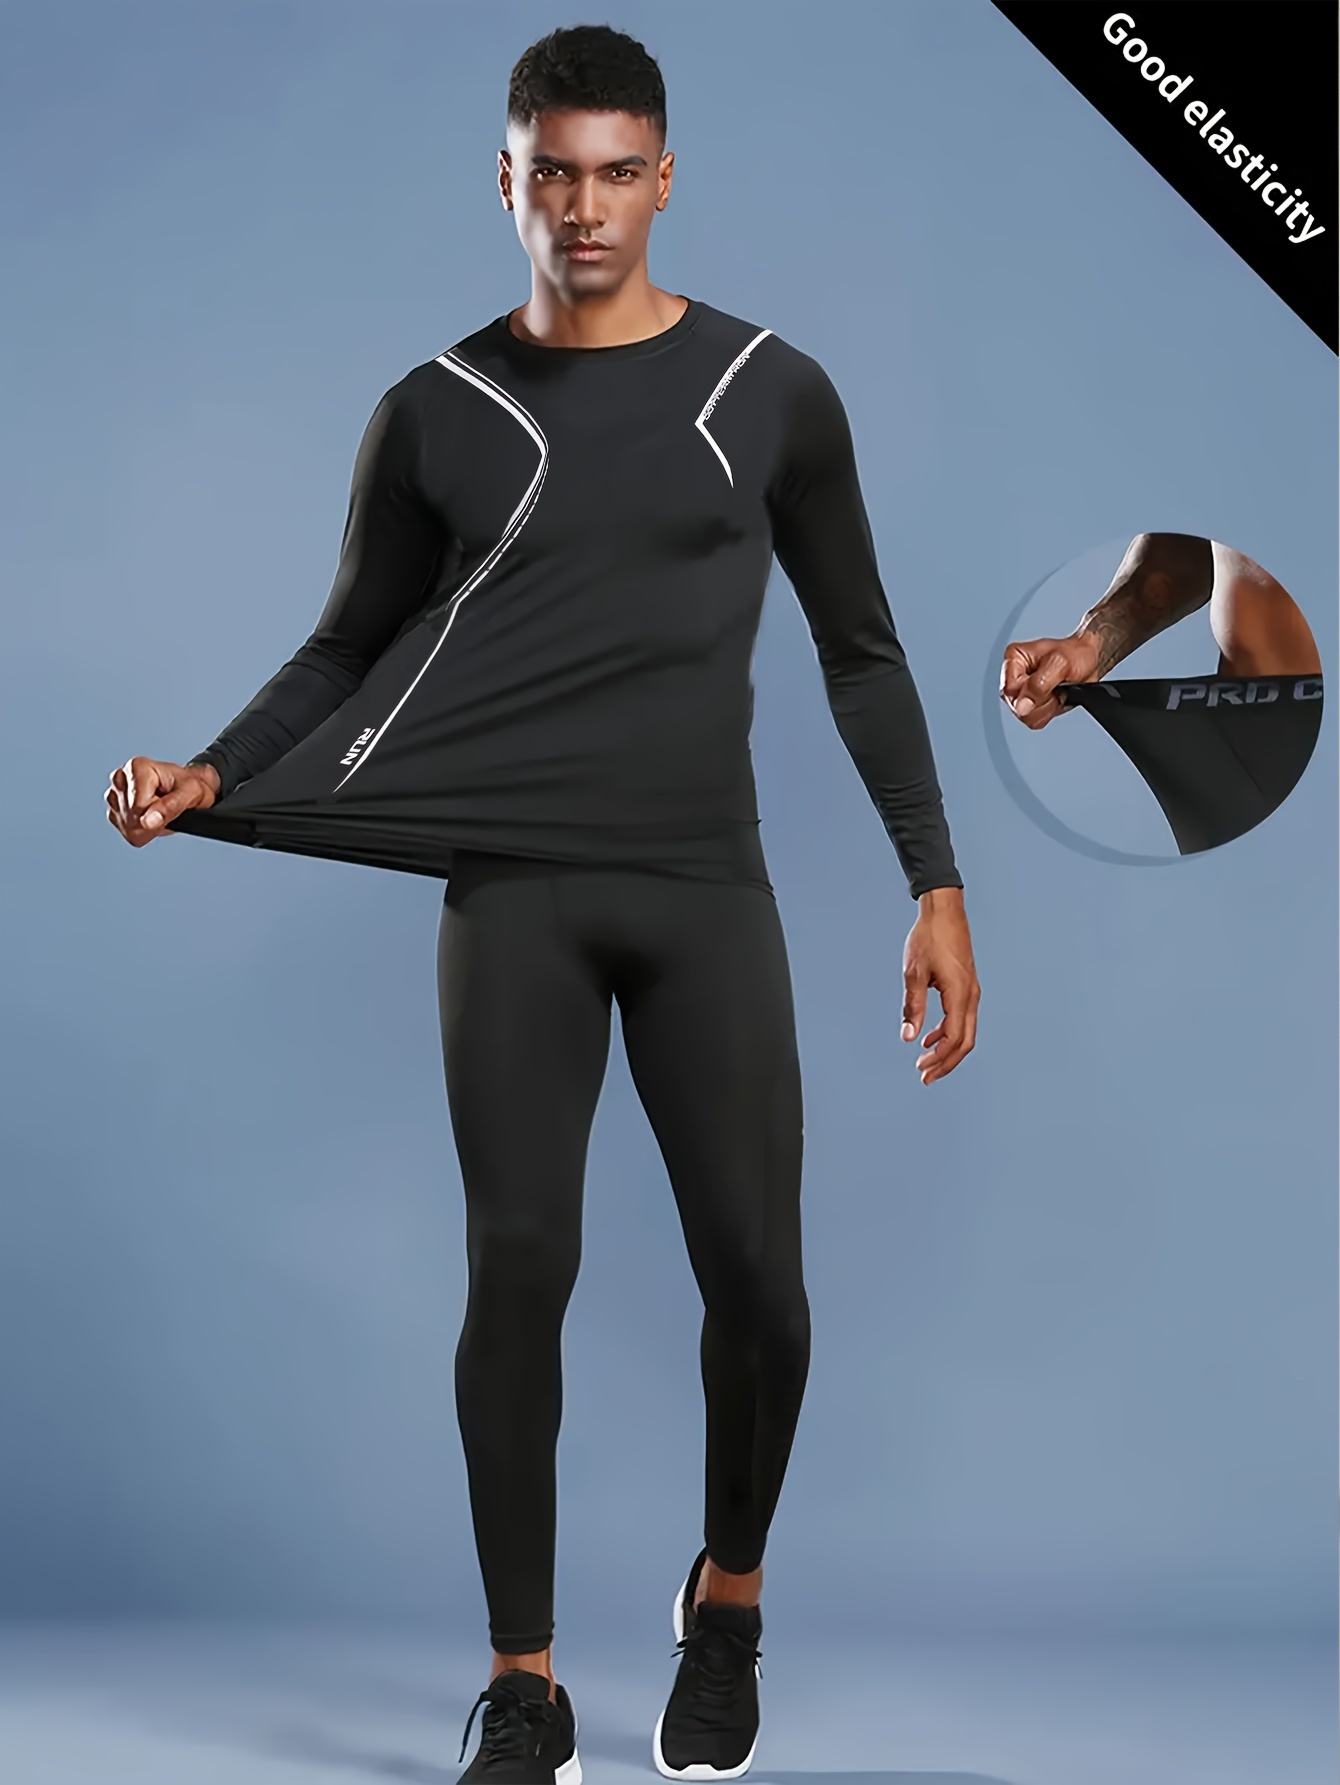 Mens Thermal Underwear 2 pc Long Sleeve Top and Pants Breathable